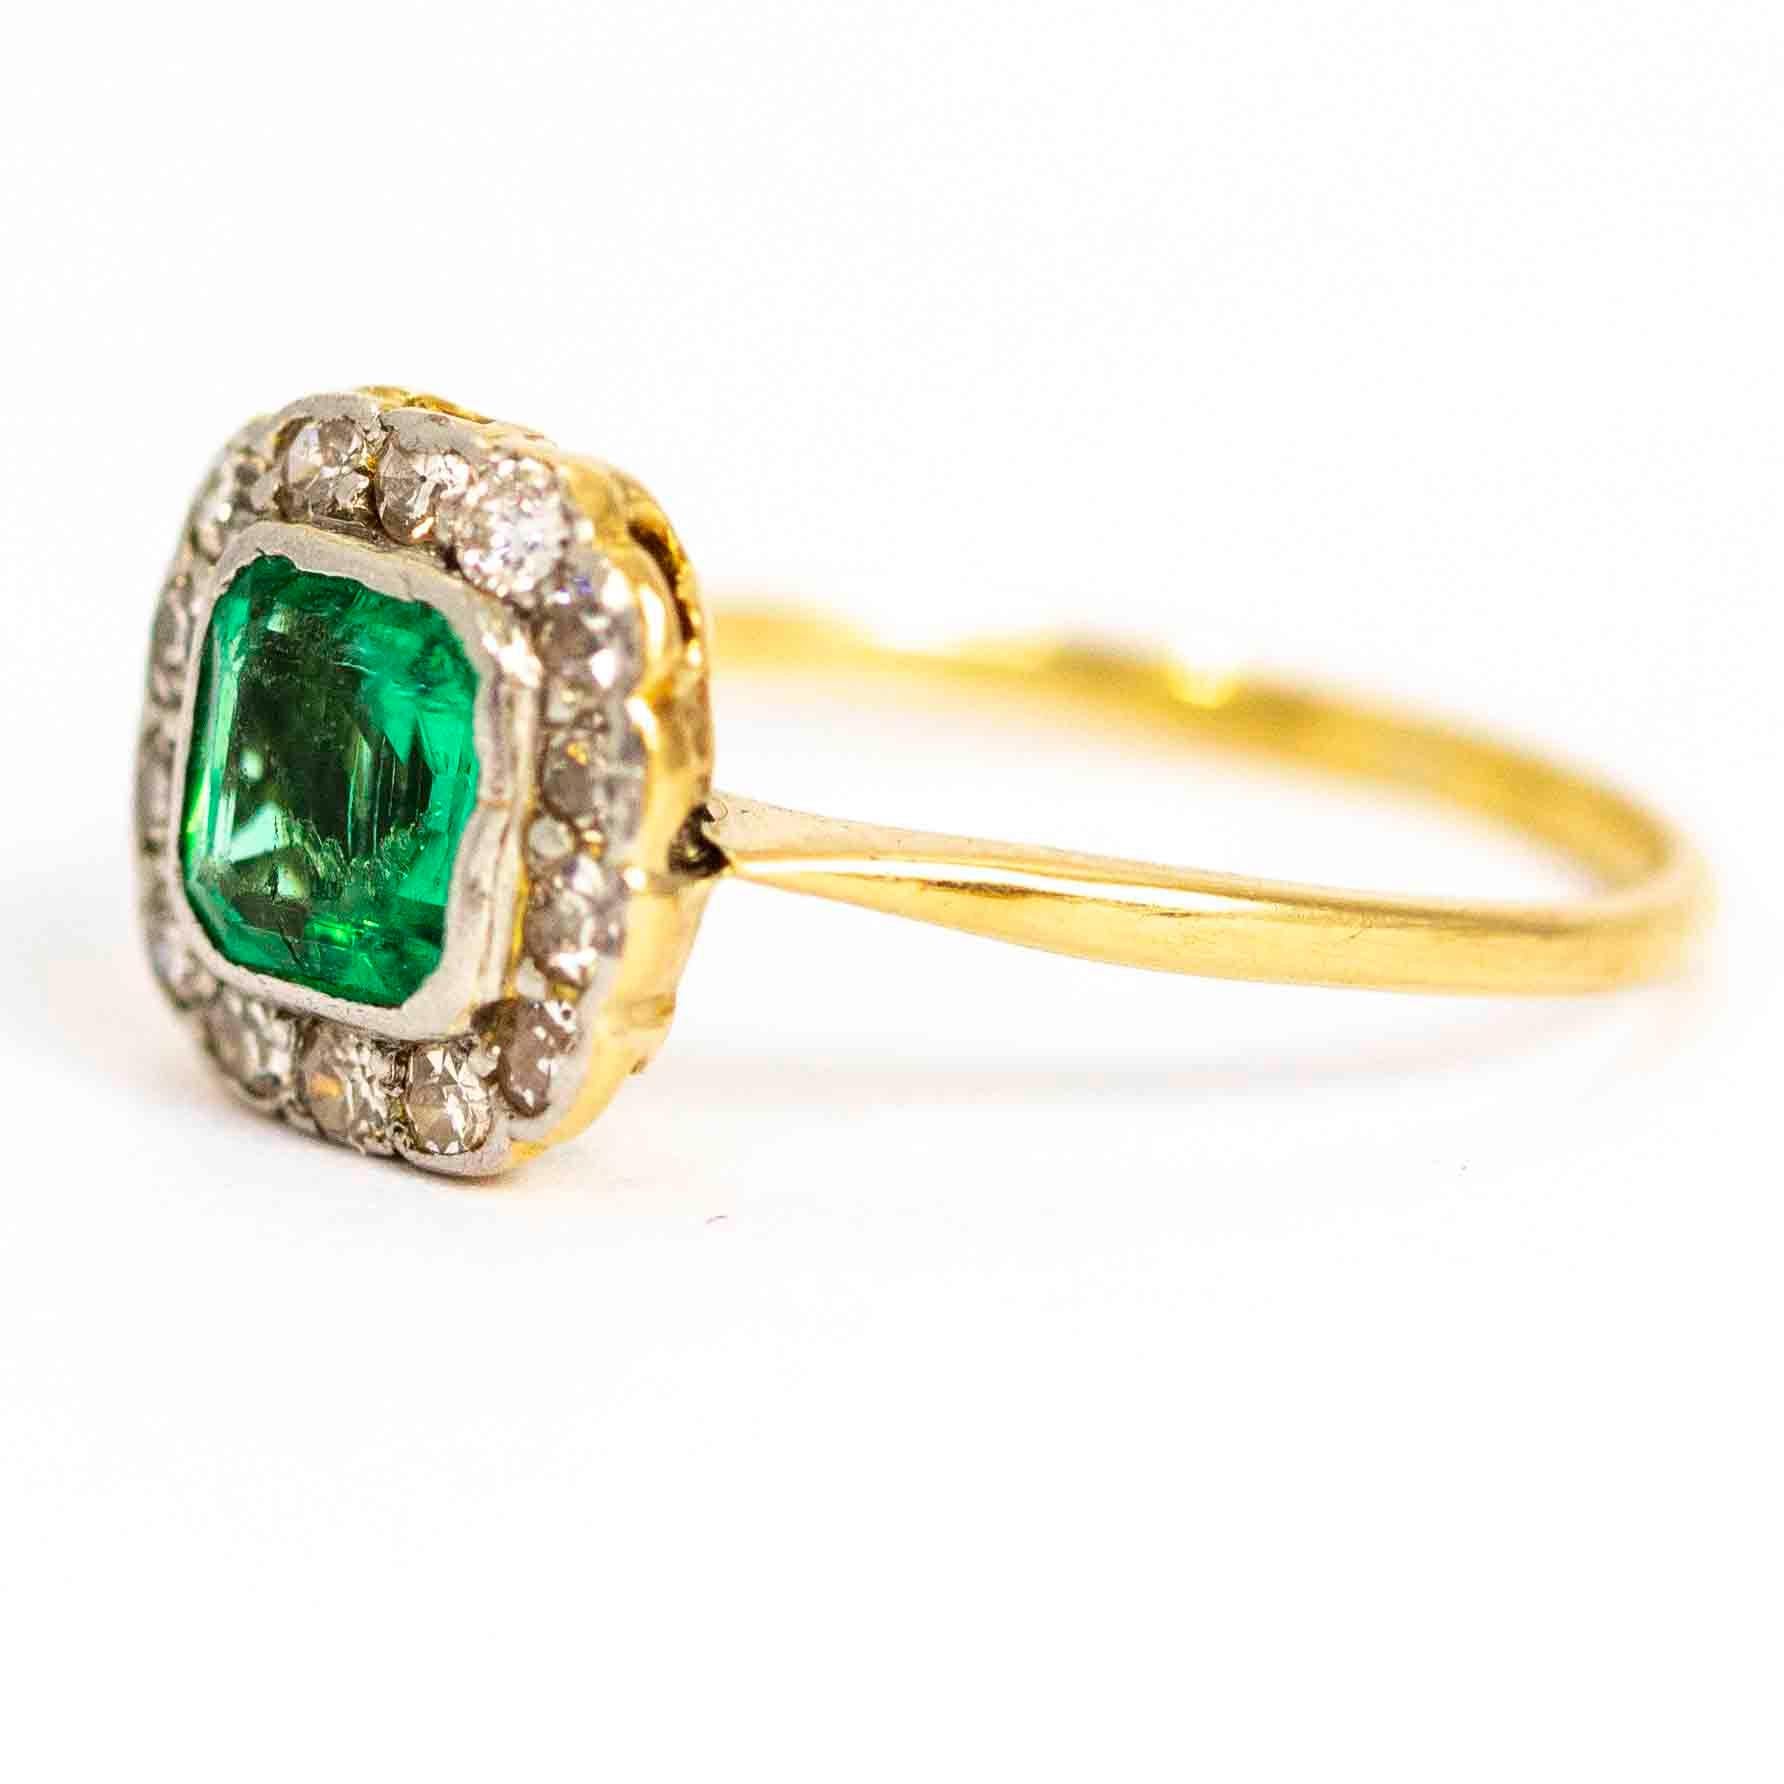 An exquisite vintage cluster ring. Centrally set with a magnificent emerald measuring approximately 90 points, surrounded by a halo of 14 wonderful round cut diamonds. The total diamond weight in this ring is approximately 0.42 carats. Modelled in